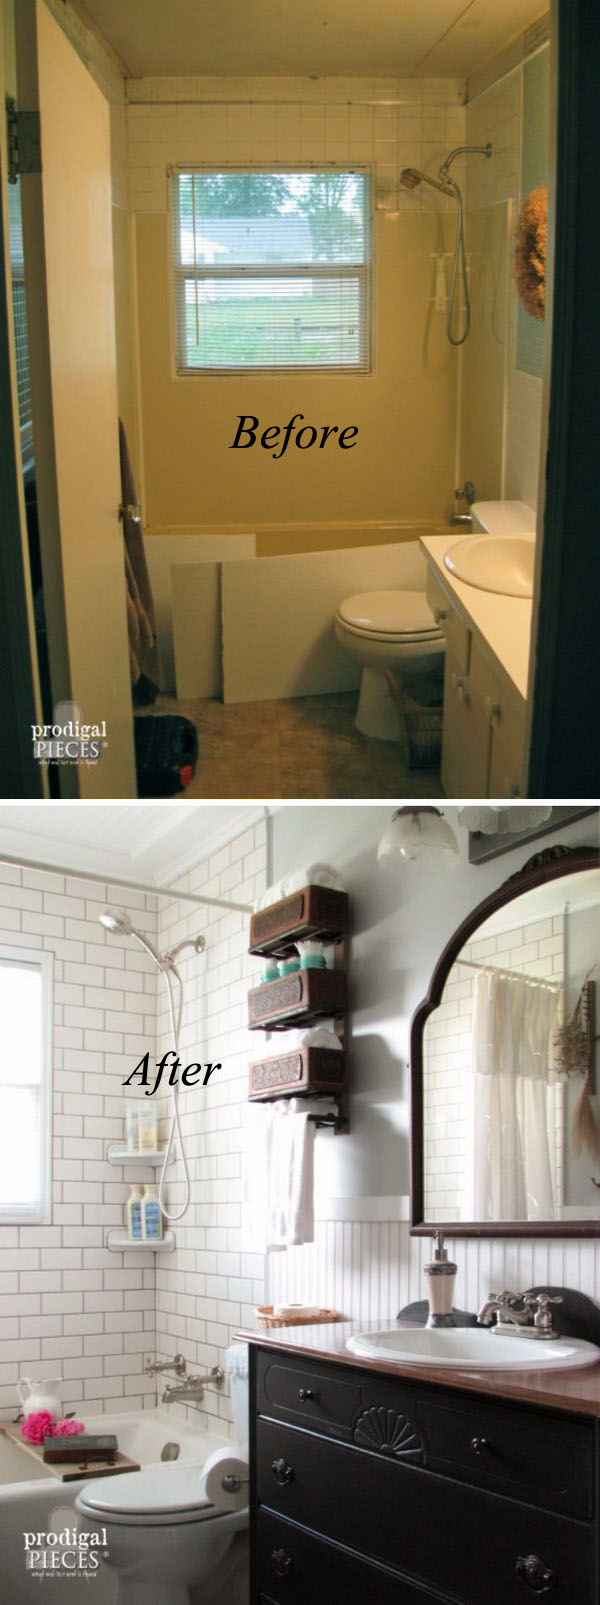 45-46-bathroom-remodel-before-and-after